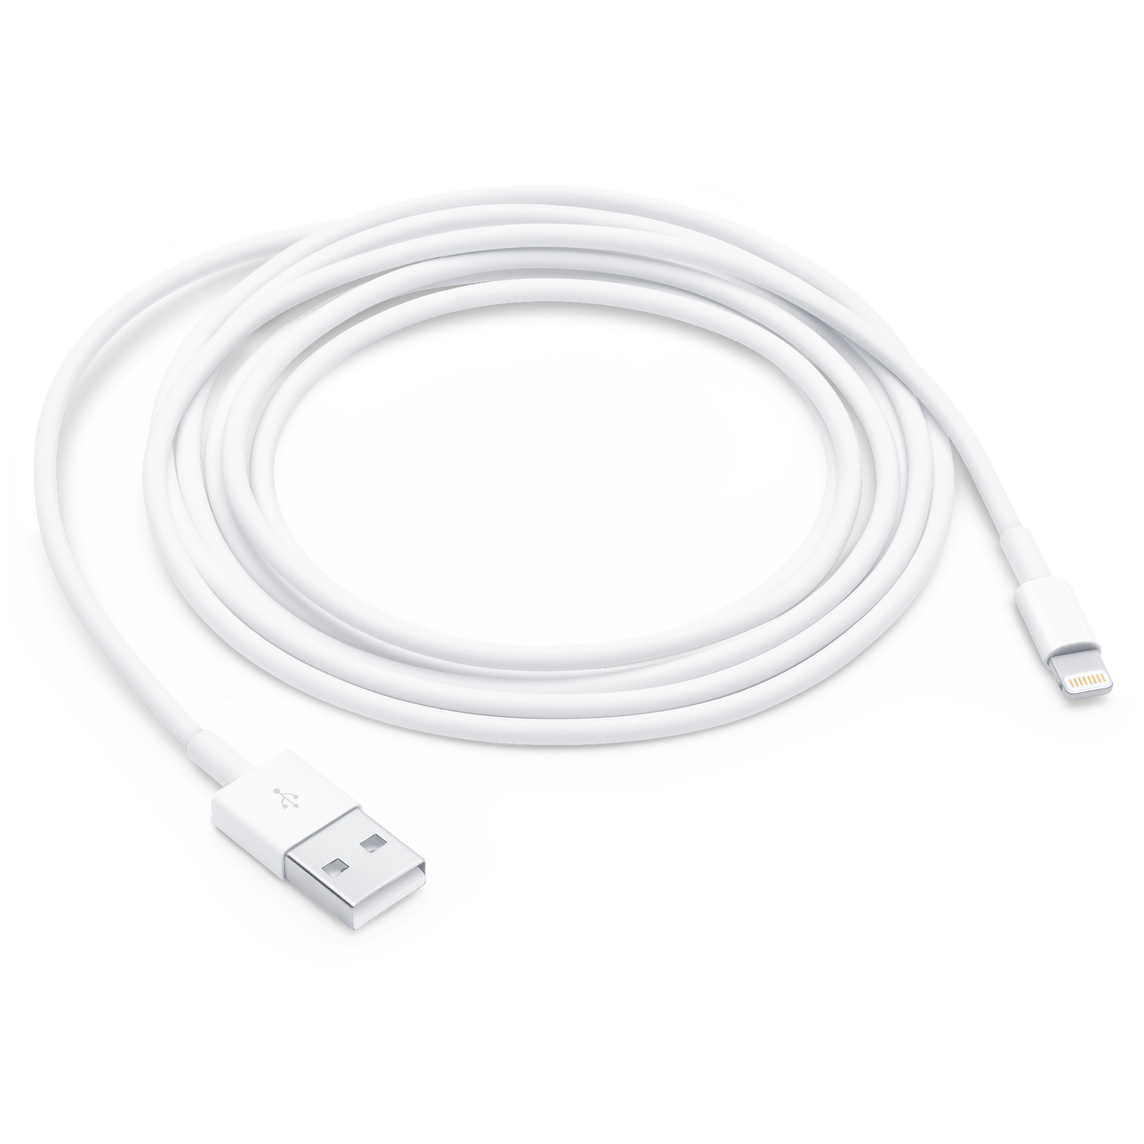 Comtrading USB cable "Lightning to USB-A" (2M)